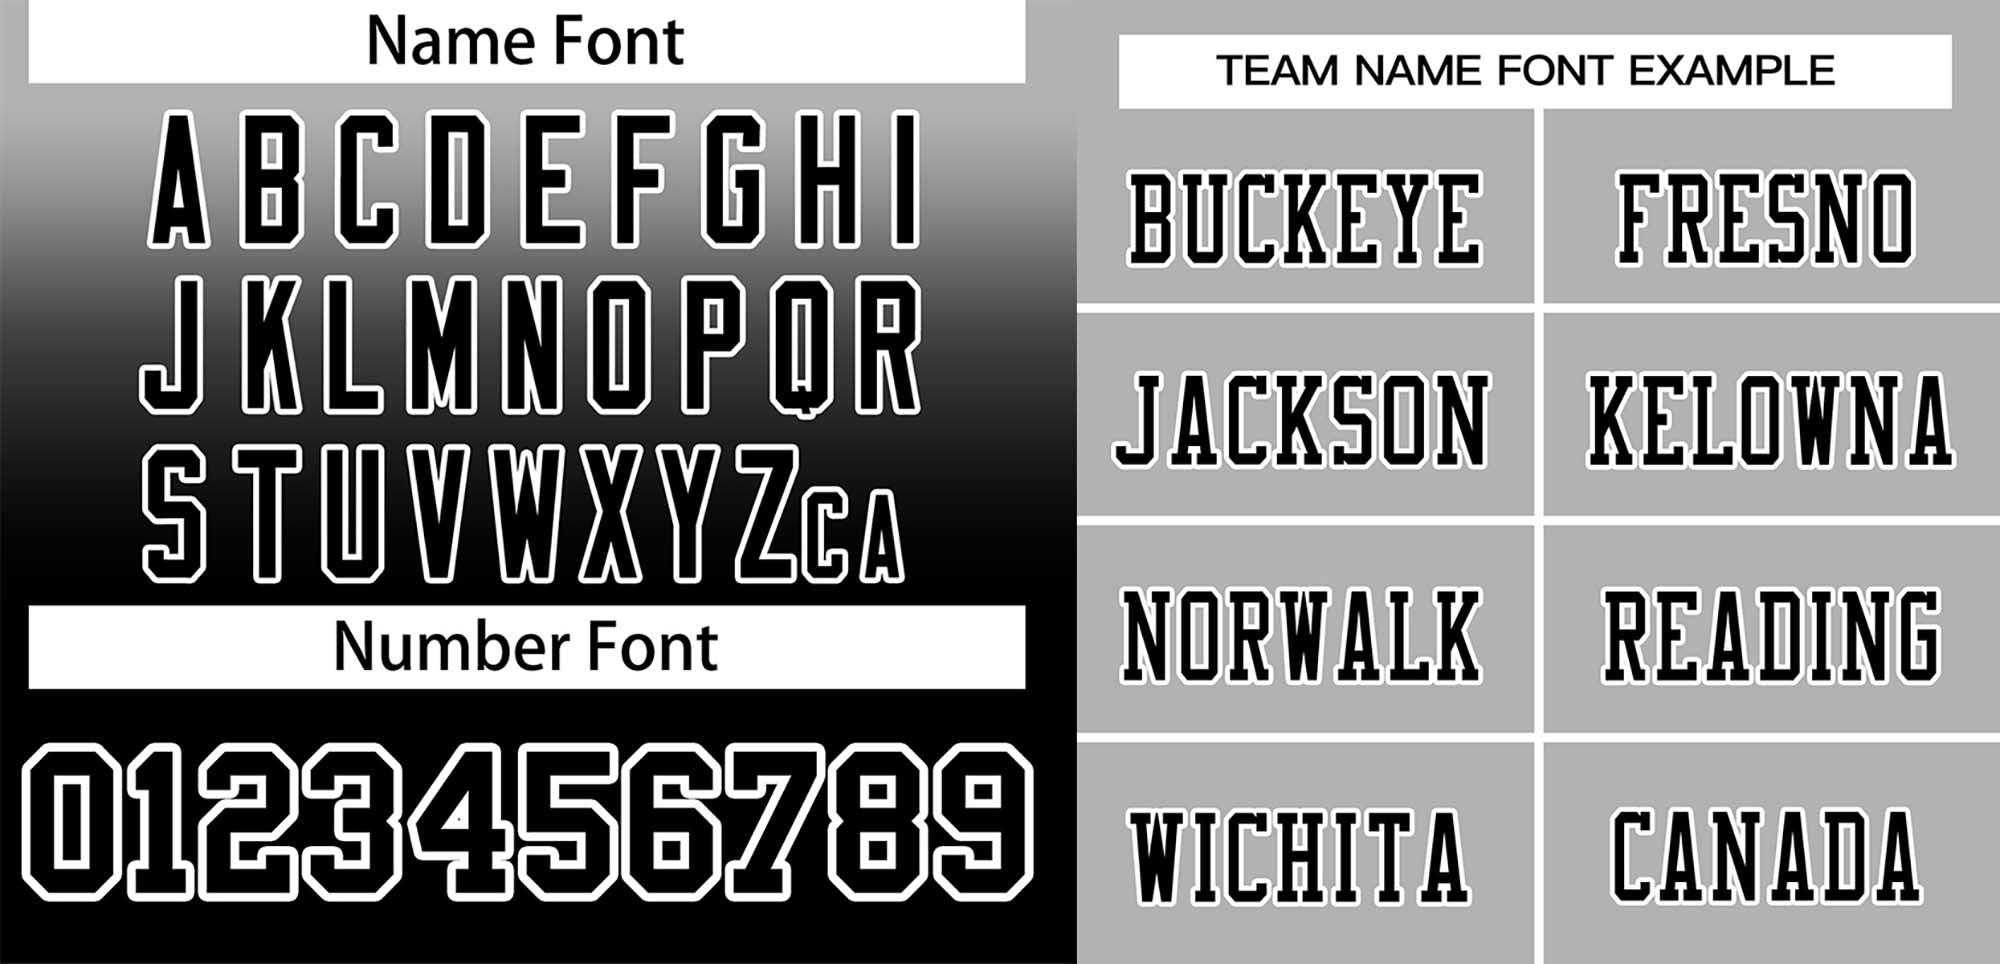 customized silver and black football uniforms team name example